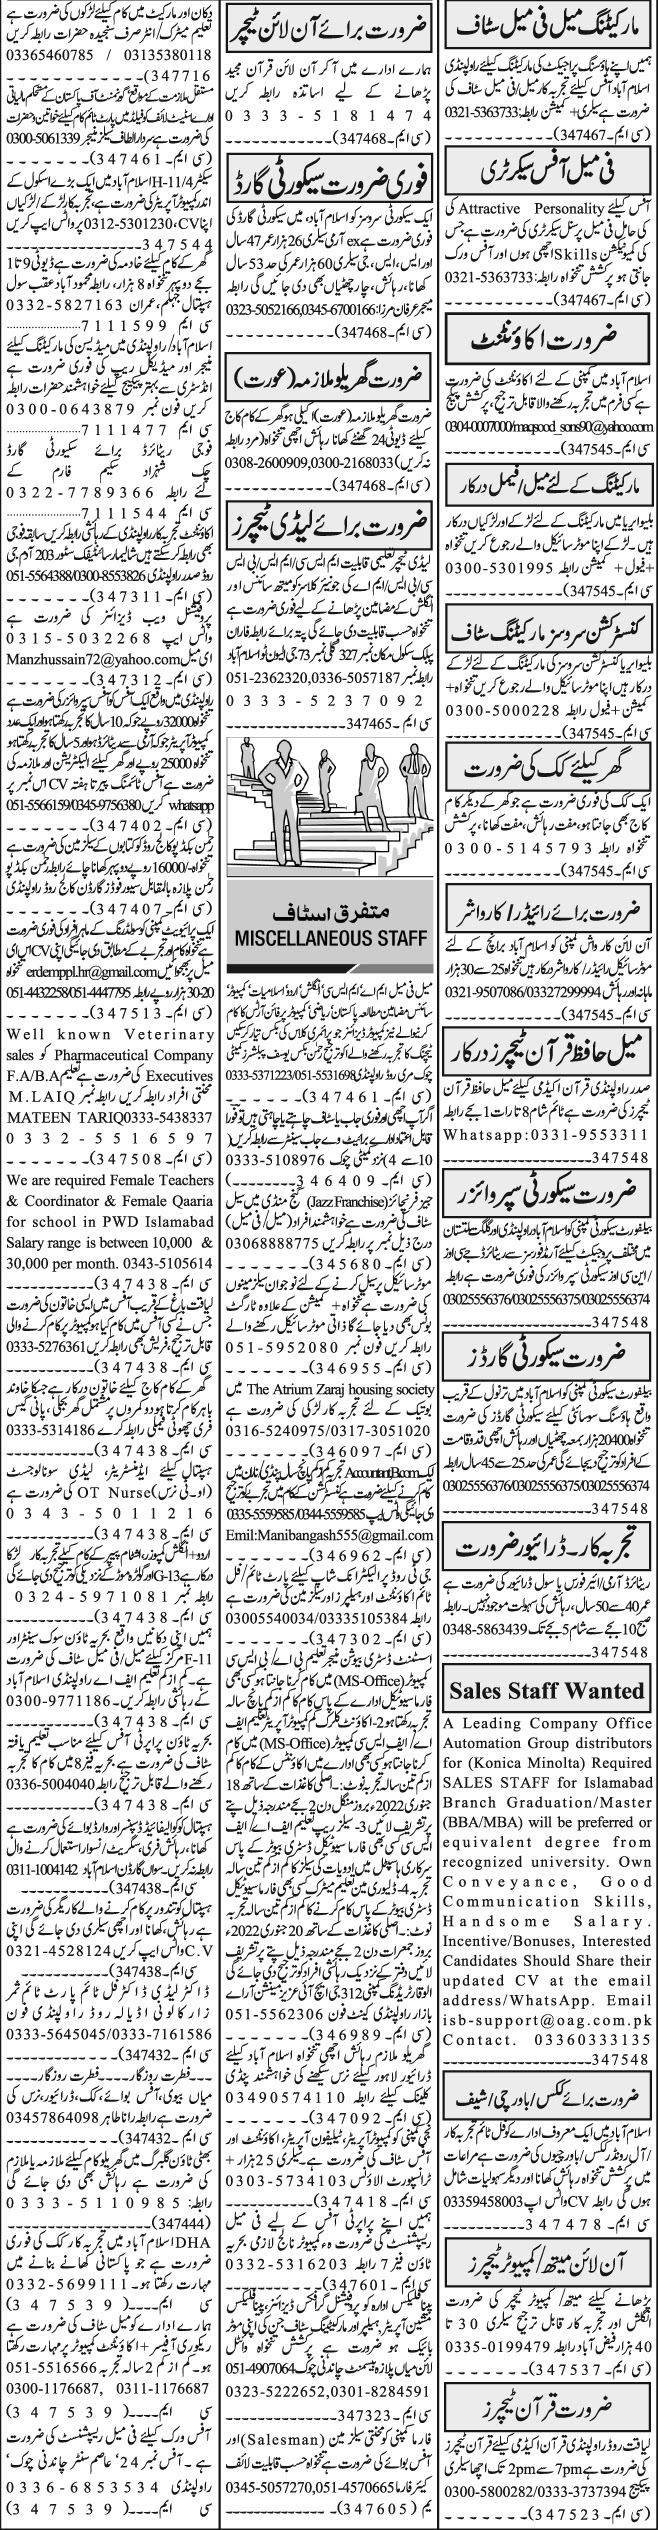 Latest Private Jobs in 100 Departments in Pakistan 2022